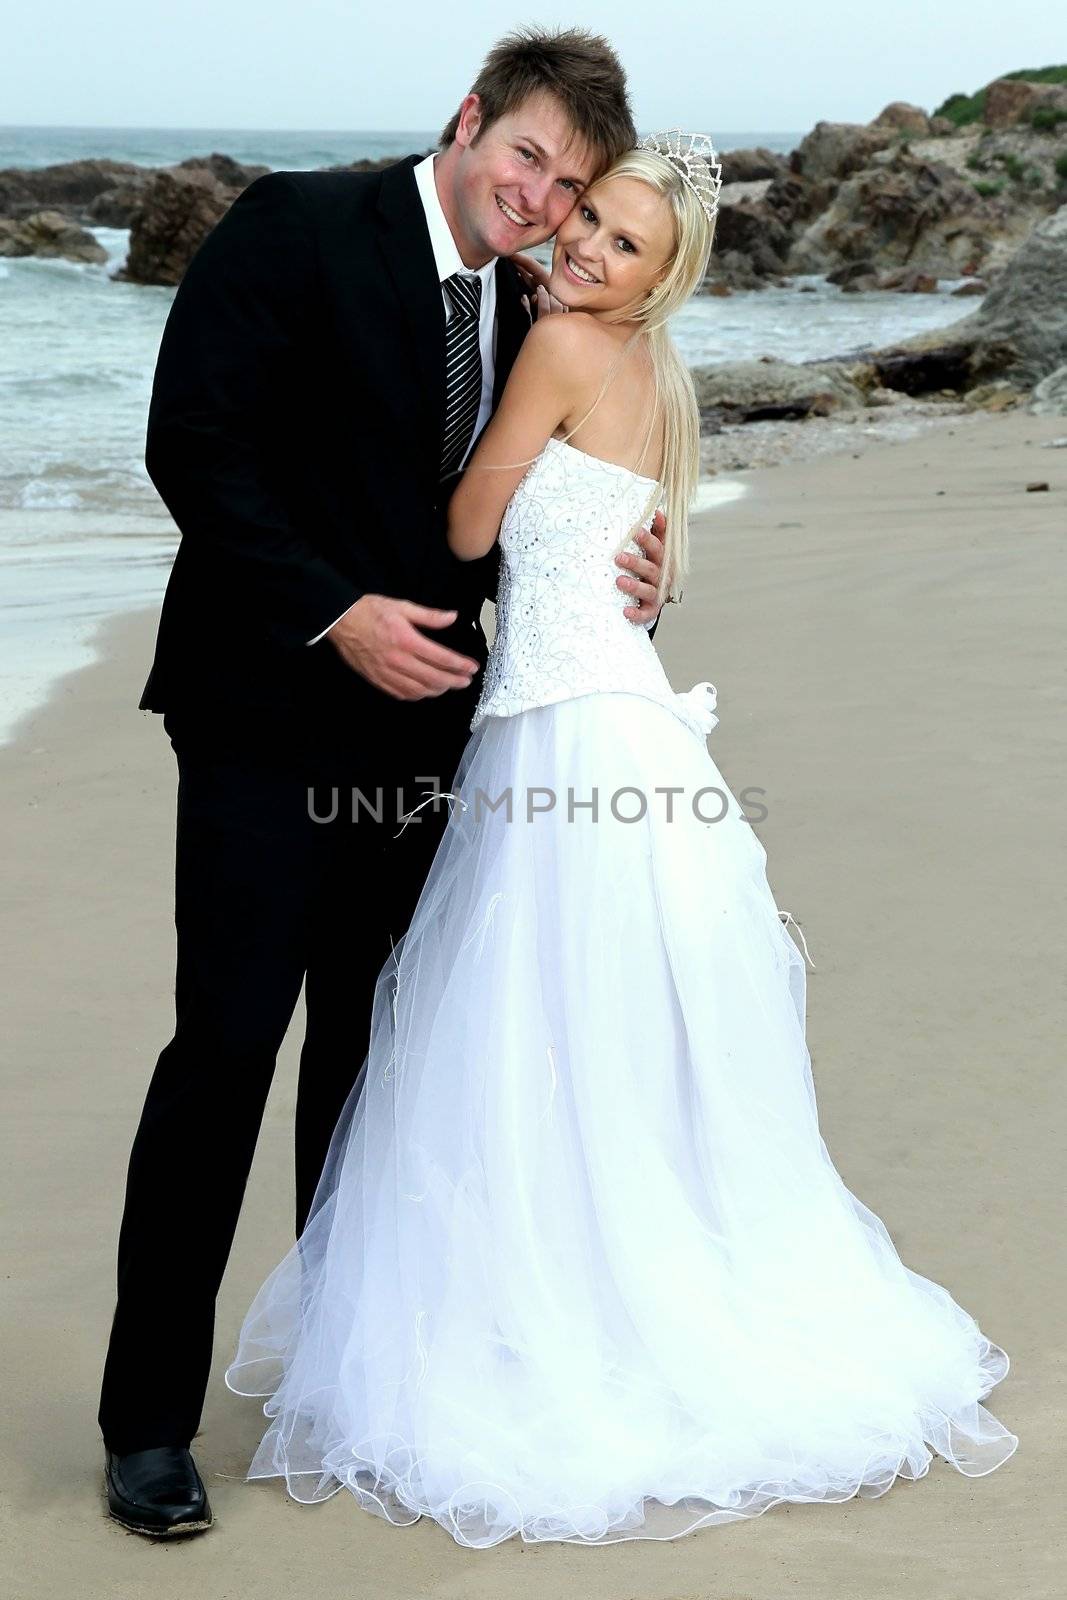 Lovely Wedding Couple at the Sea Side by fouroaks